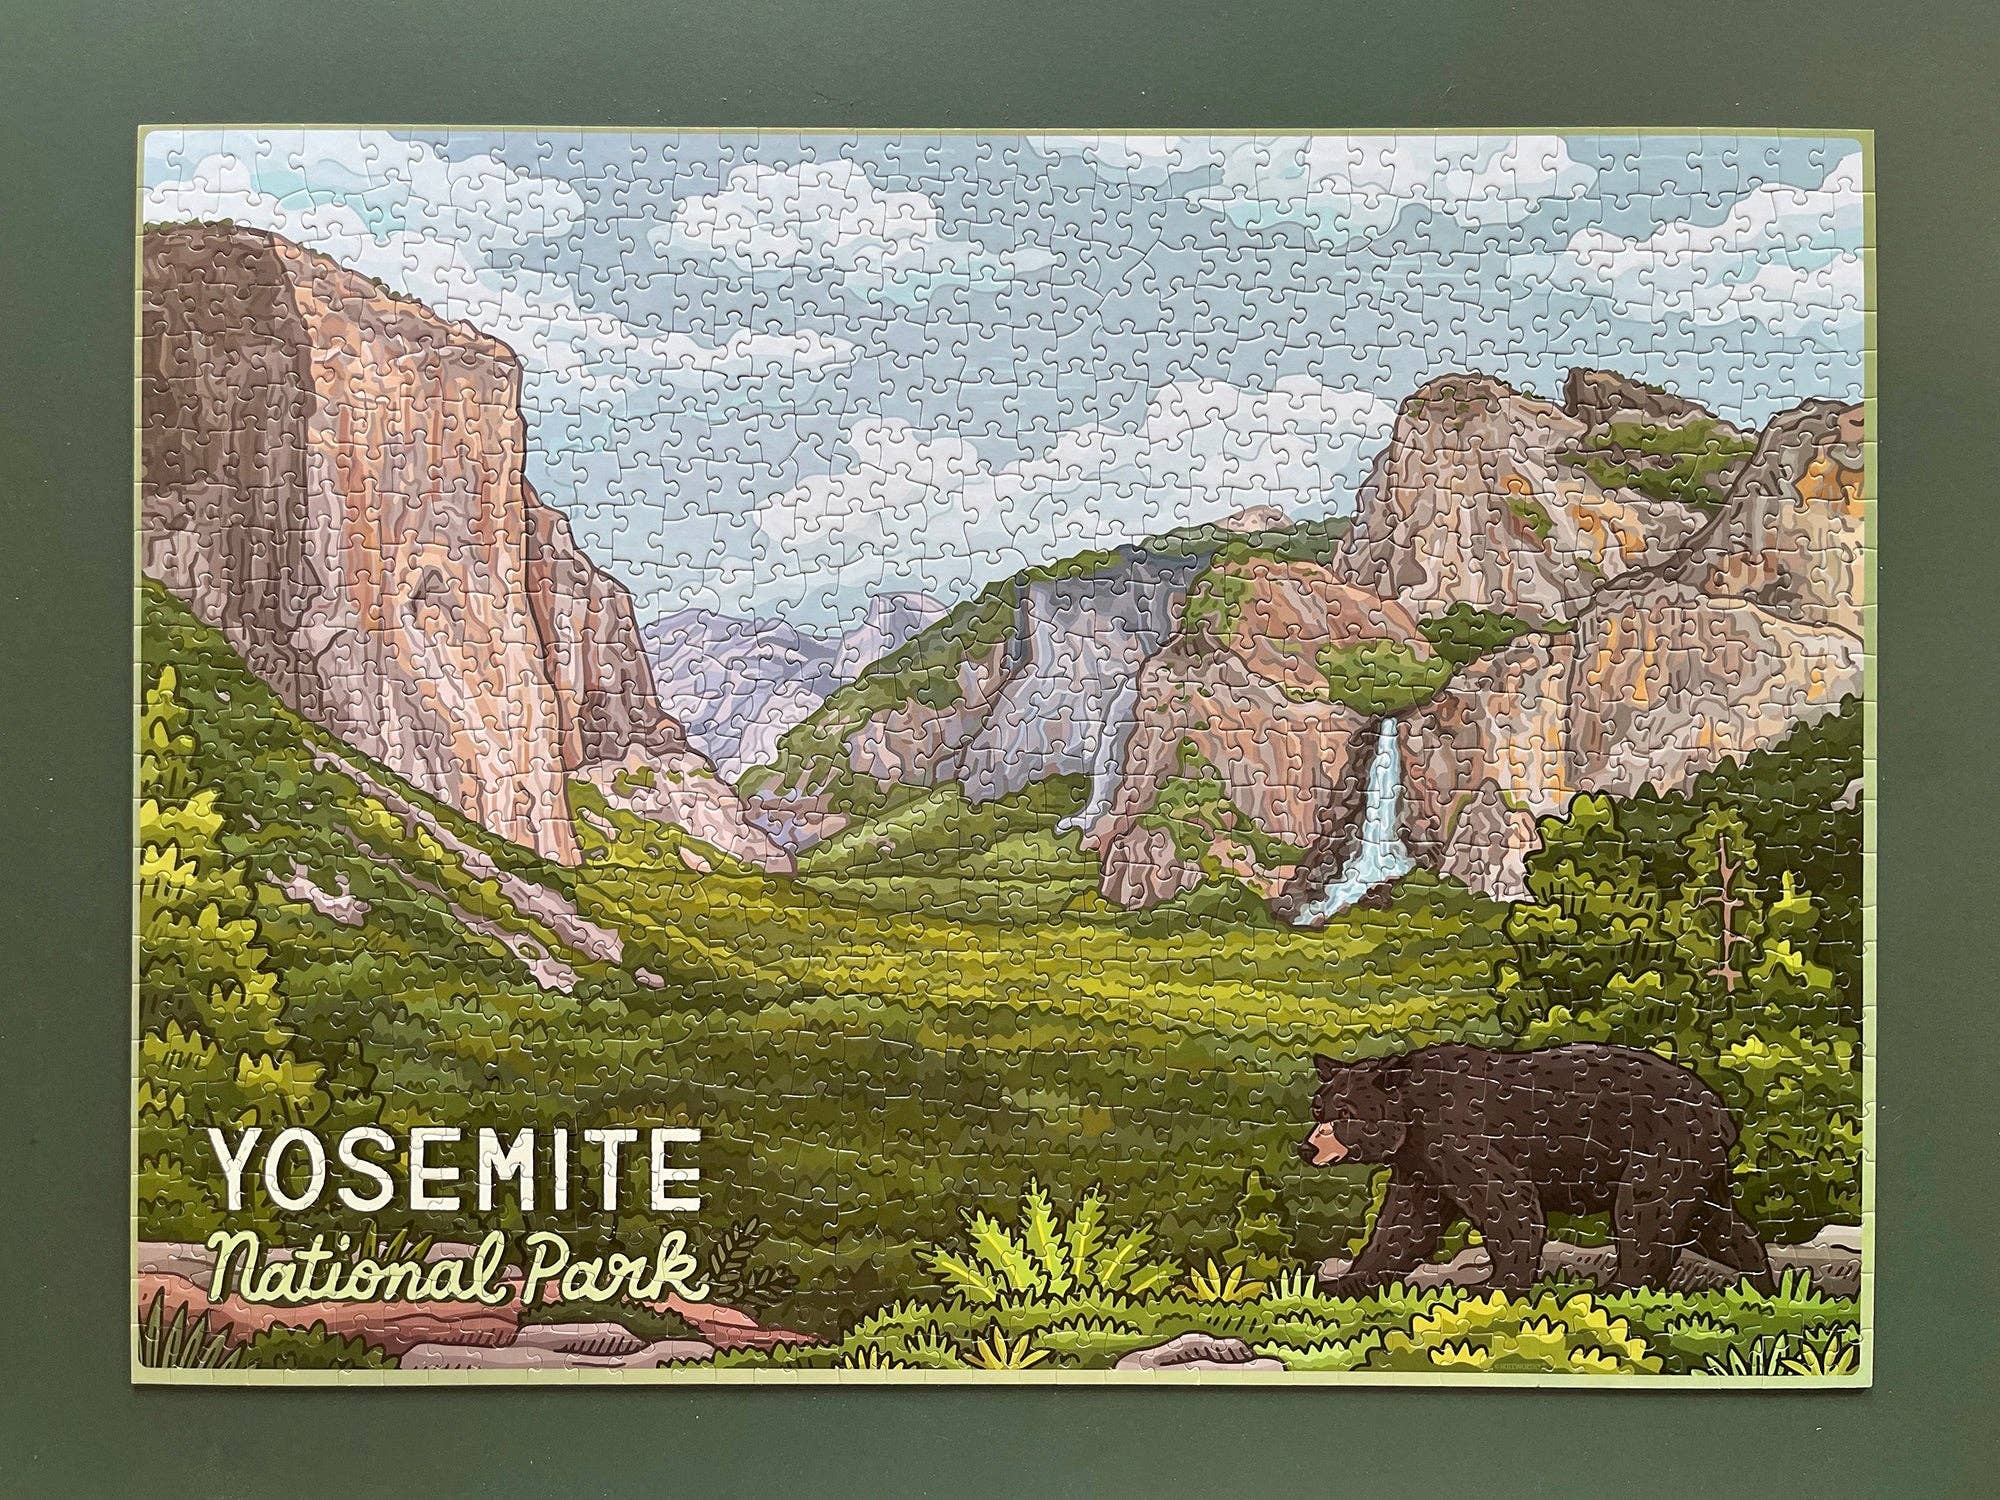 Yosemite national park puzzle with waterfall, bear and rock formations